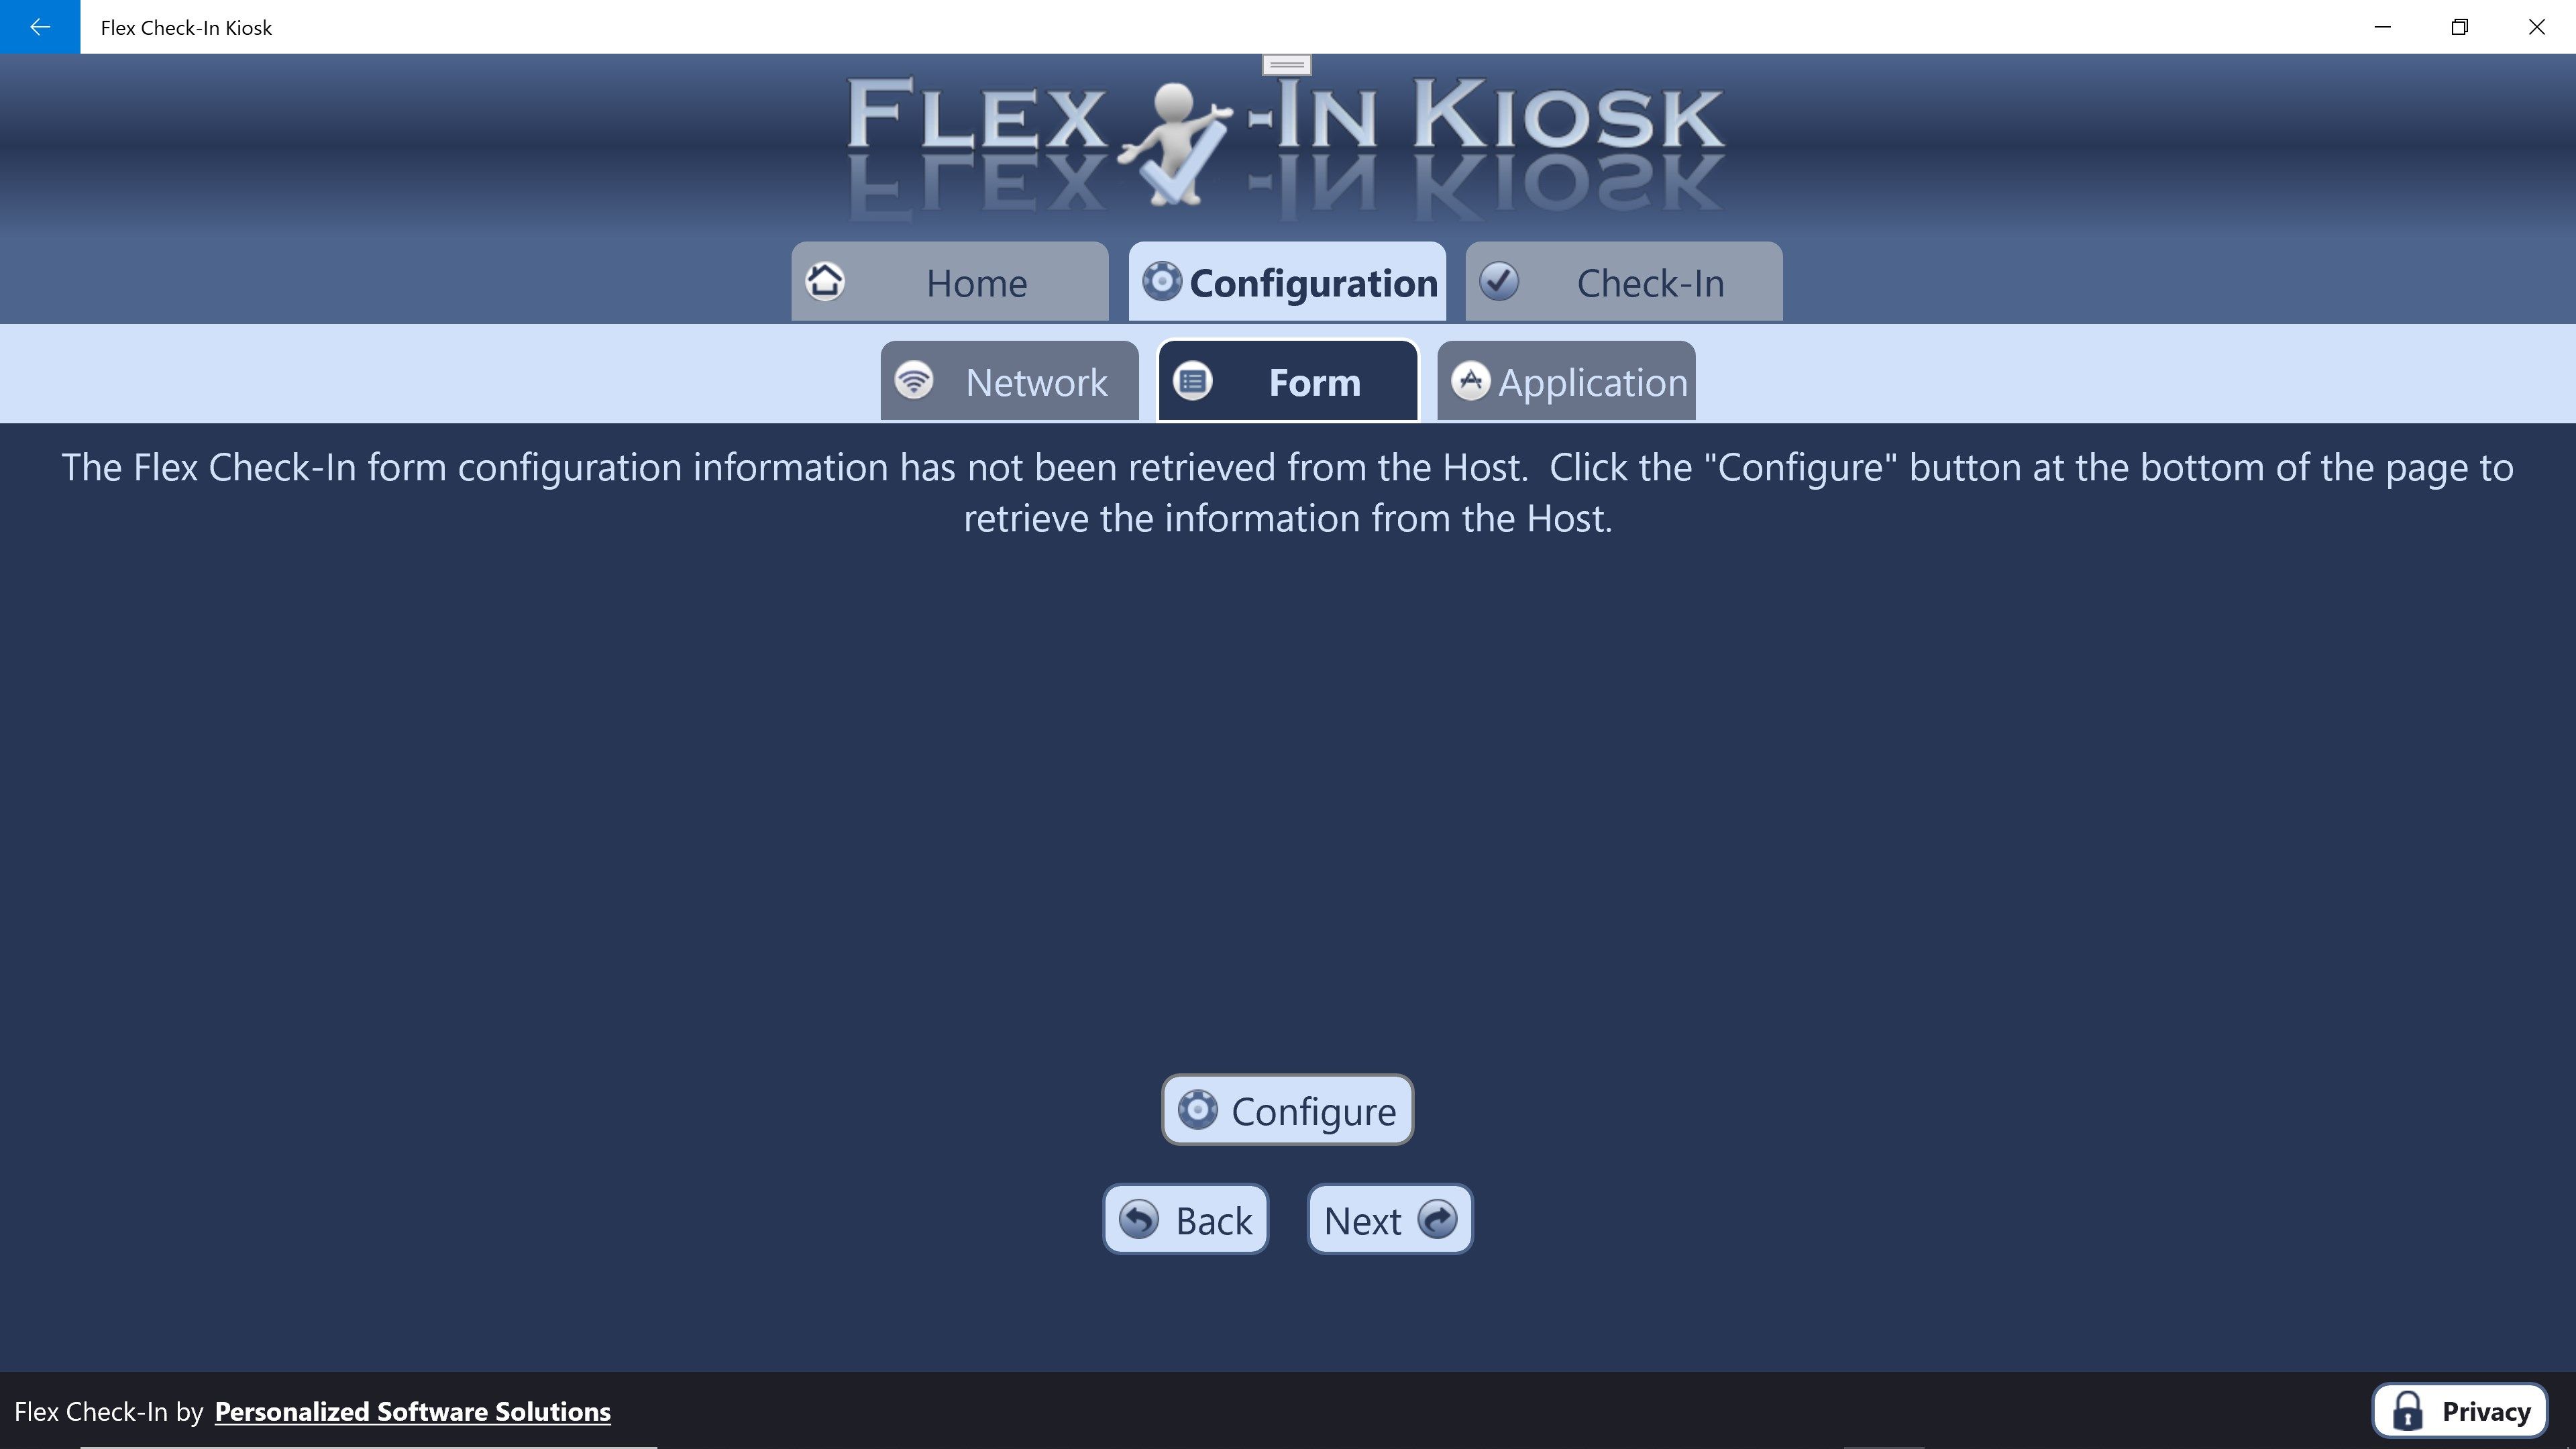 Click the Configure button to retrieve your Check-In form from the Flex Check-In Host.